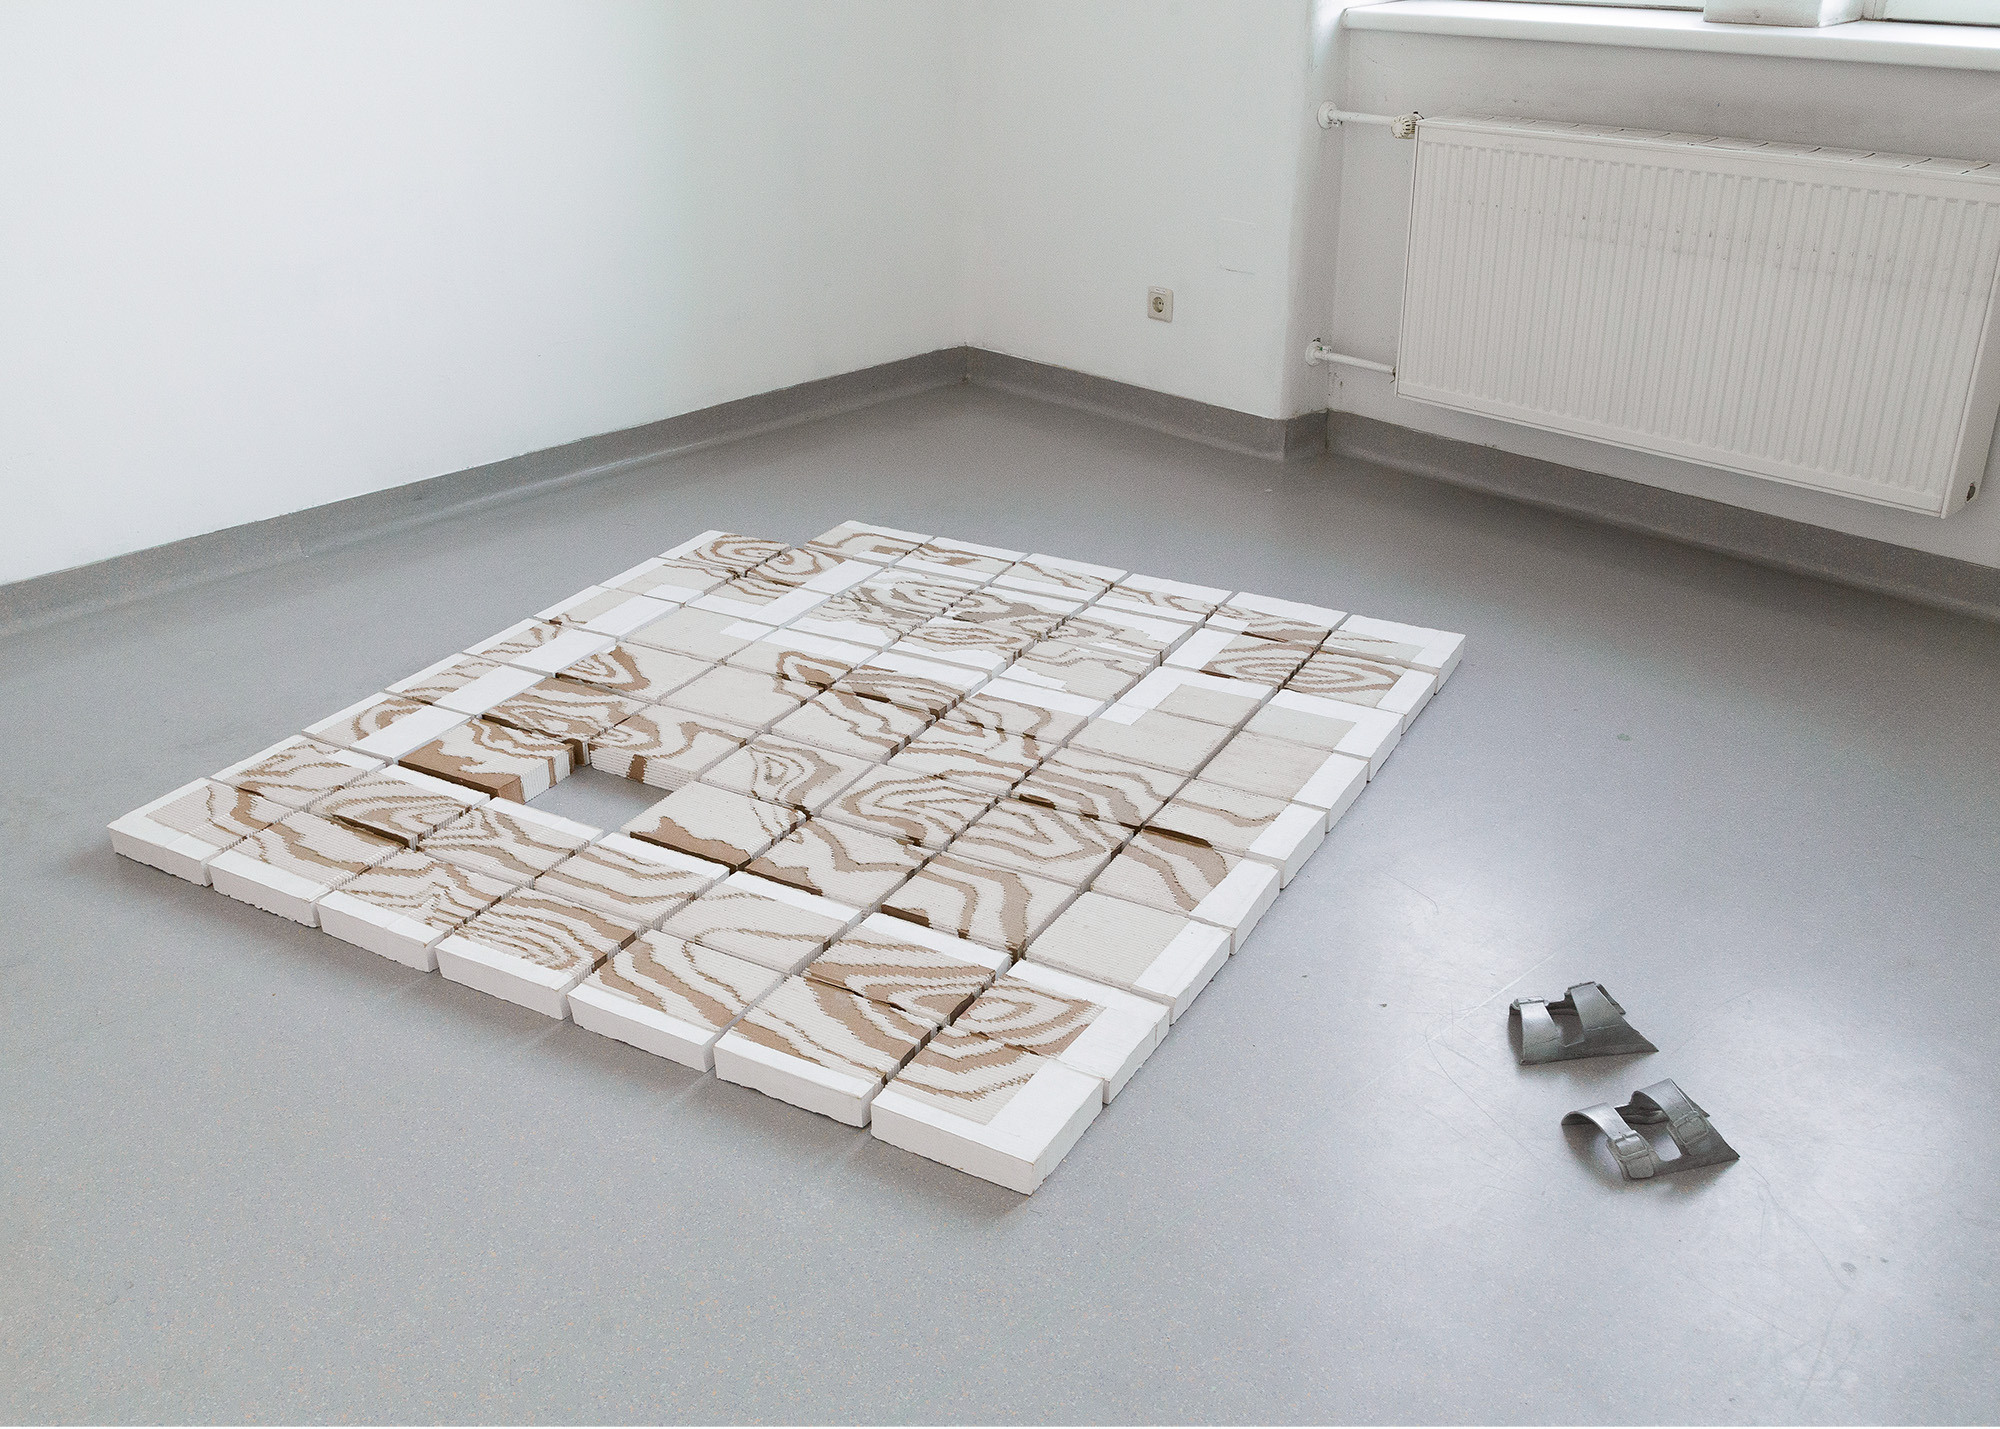 Magdalena StÃ¼ckler, searching for a place to stay, 2022, plaster, cardboard 175 Ã— 190 Ã— 5 cm / Gabriel Huth, Ruinenschlapfen, 2022, aluminium